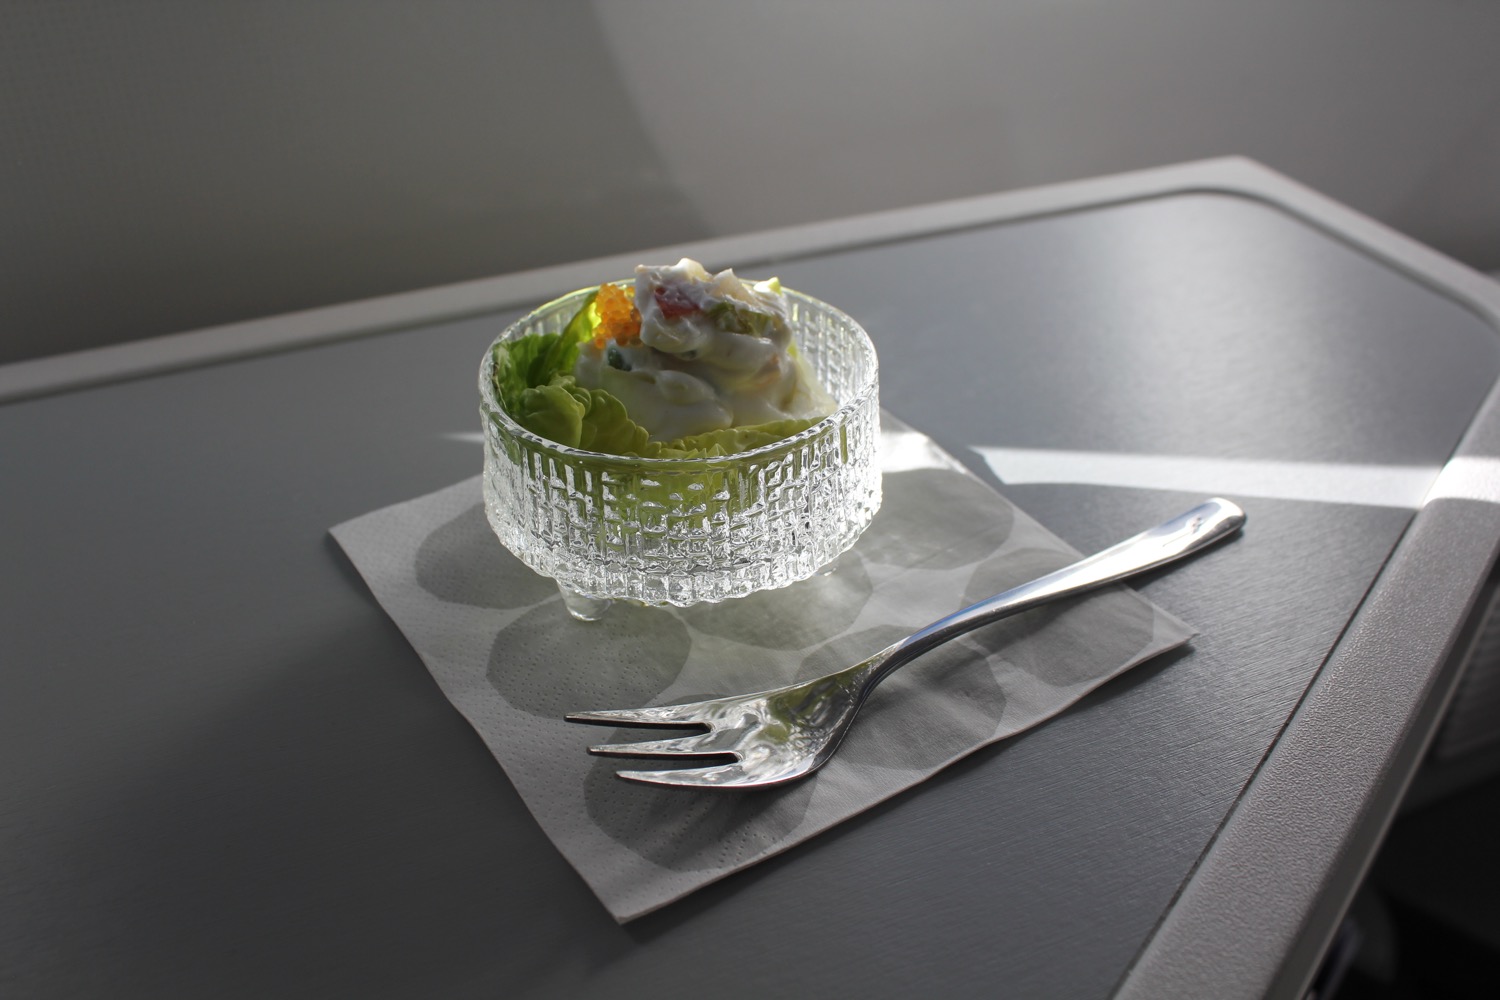 a glass bowl with food in it and a fork on a napkin